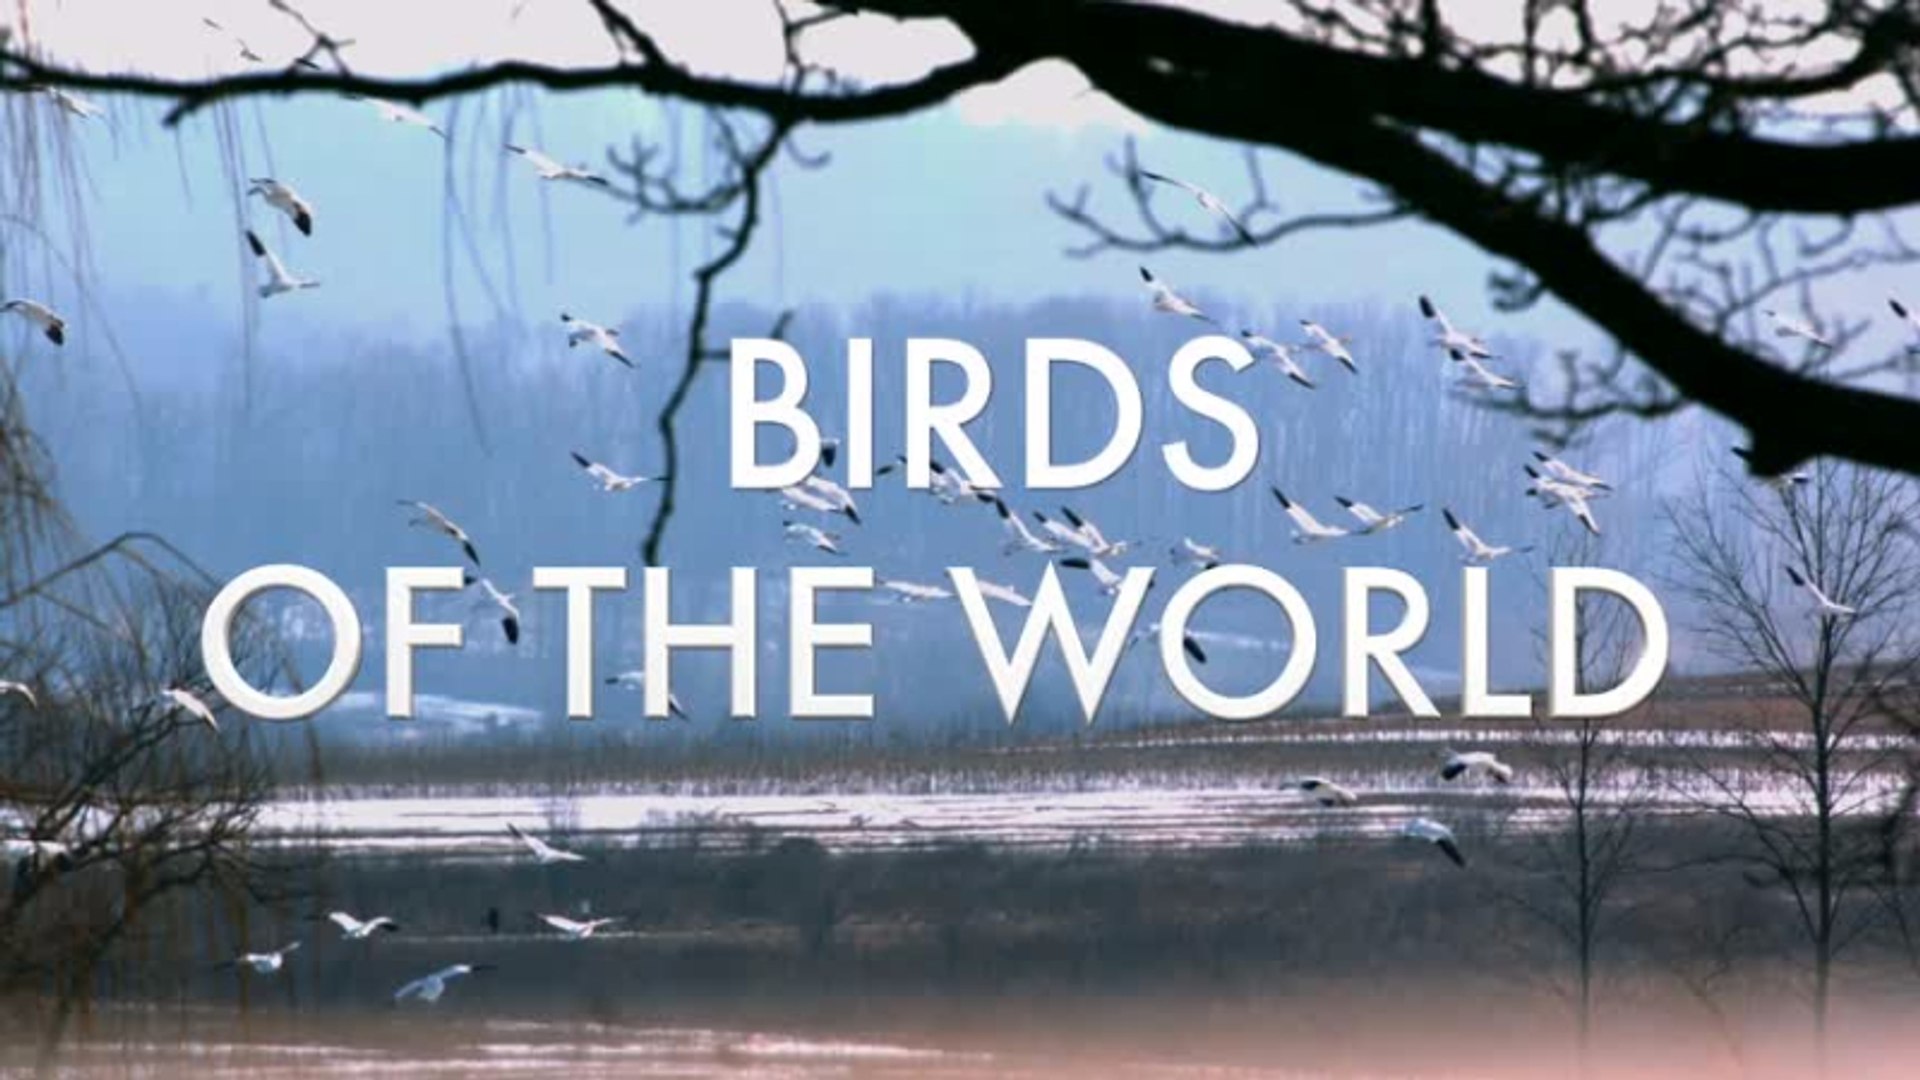 Relaxing Videos With Ambient Music & Bird Sounds: Birds #bird, #relax, #ambient, #music,